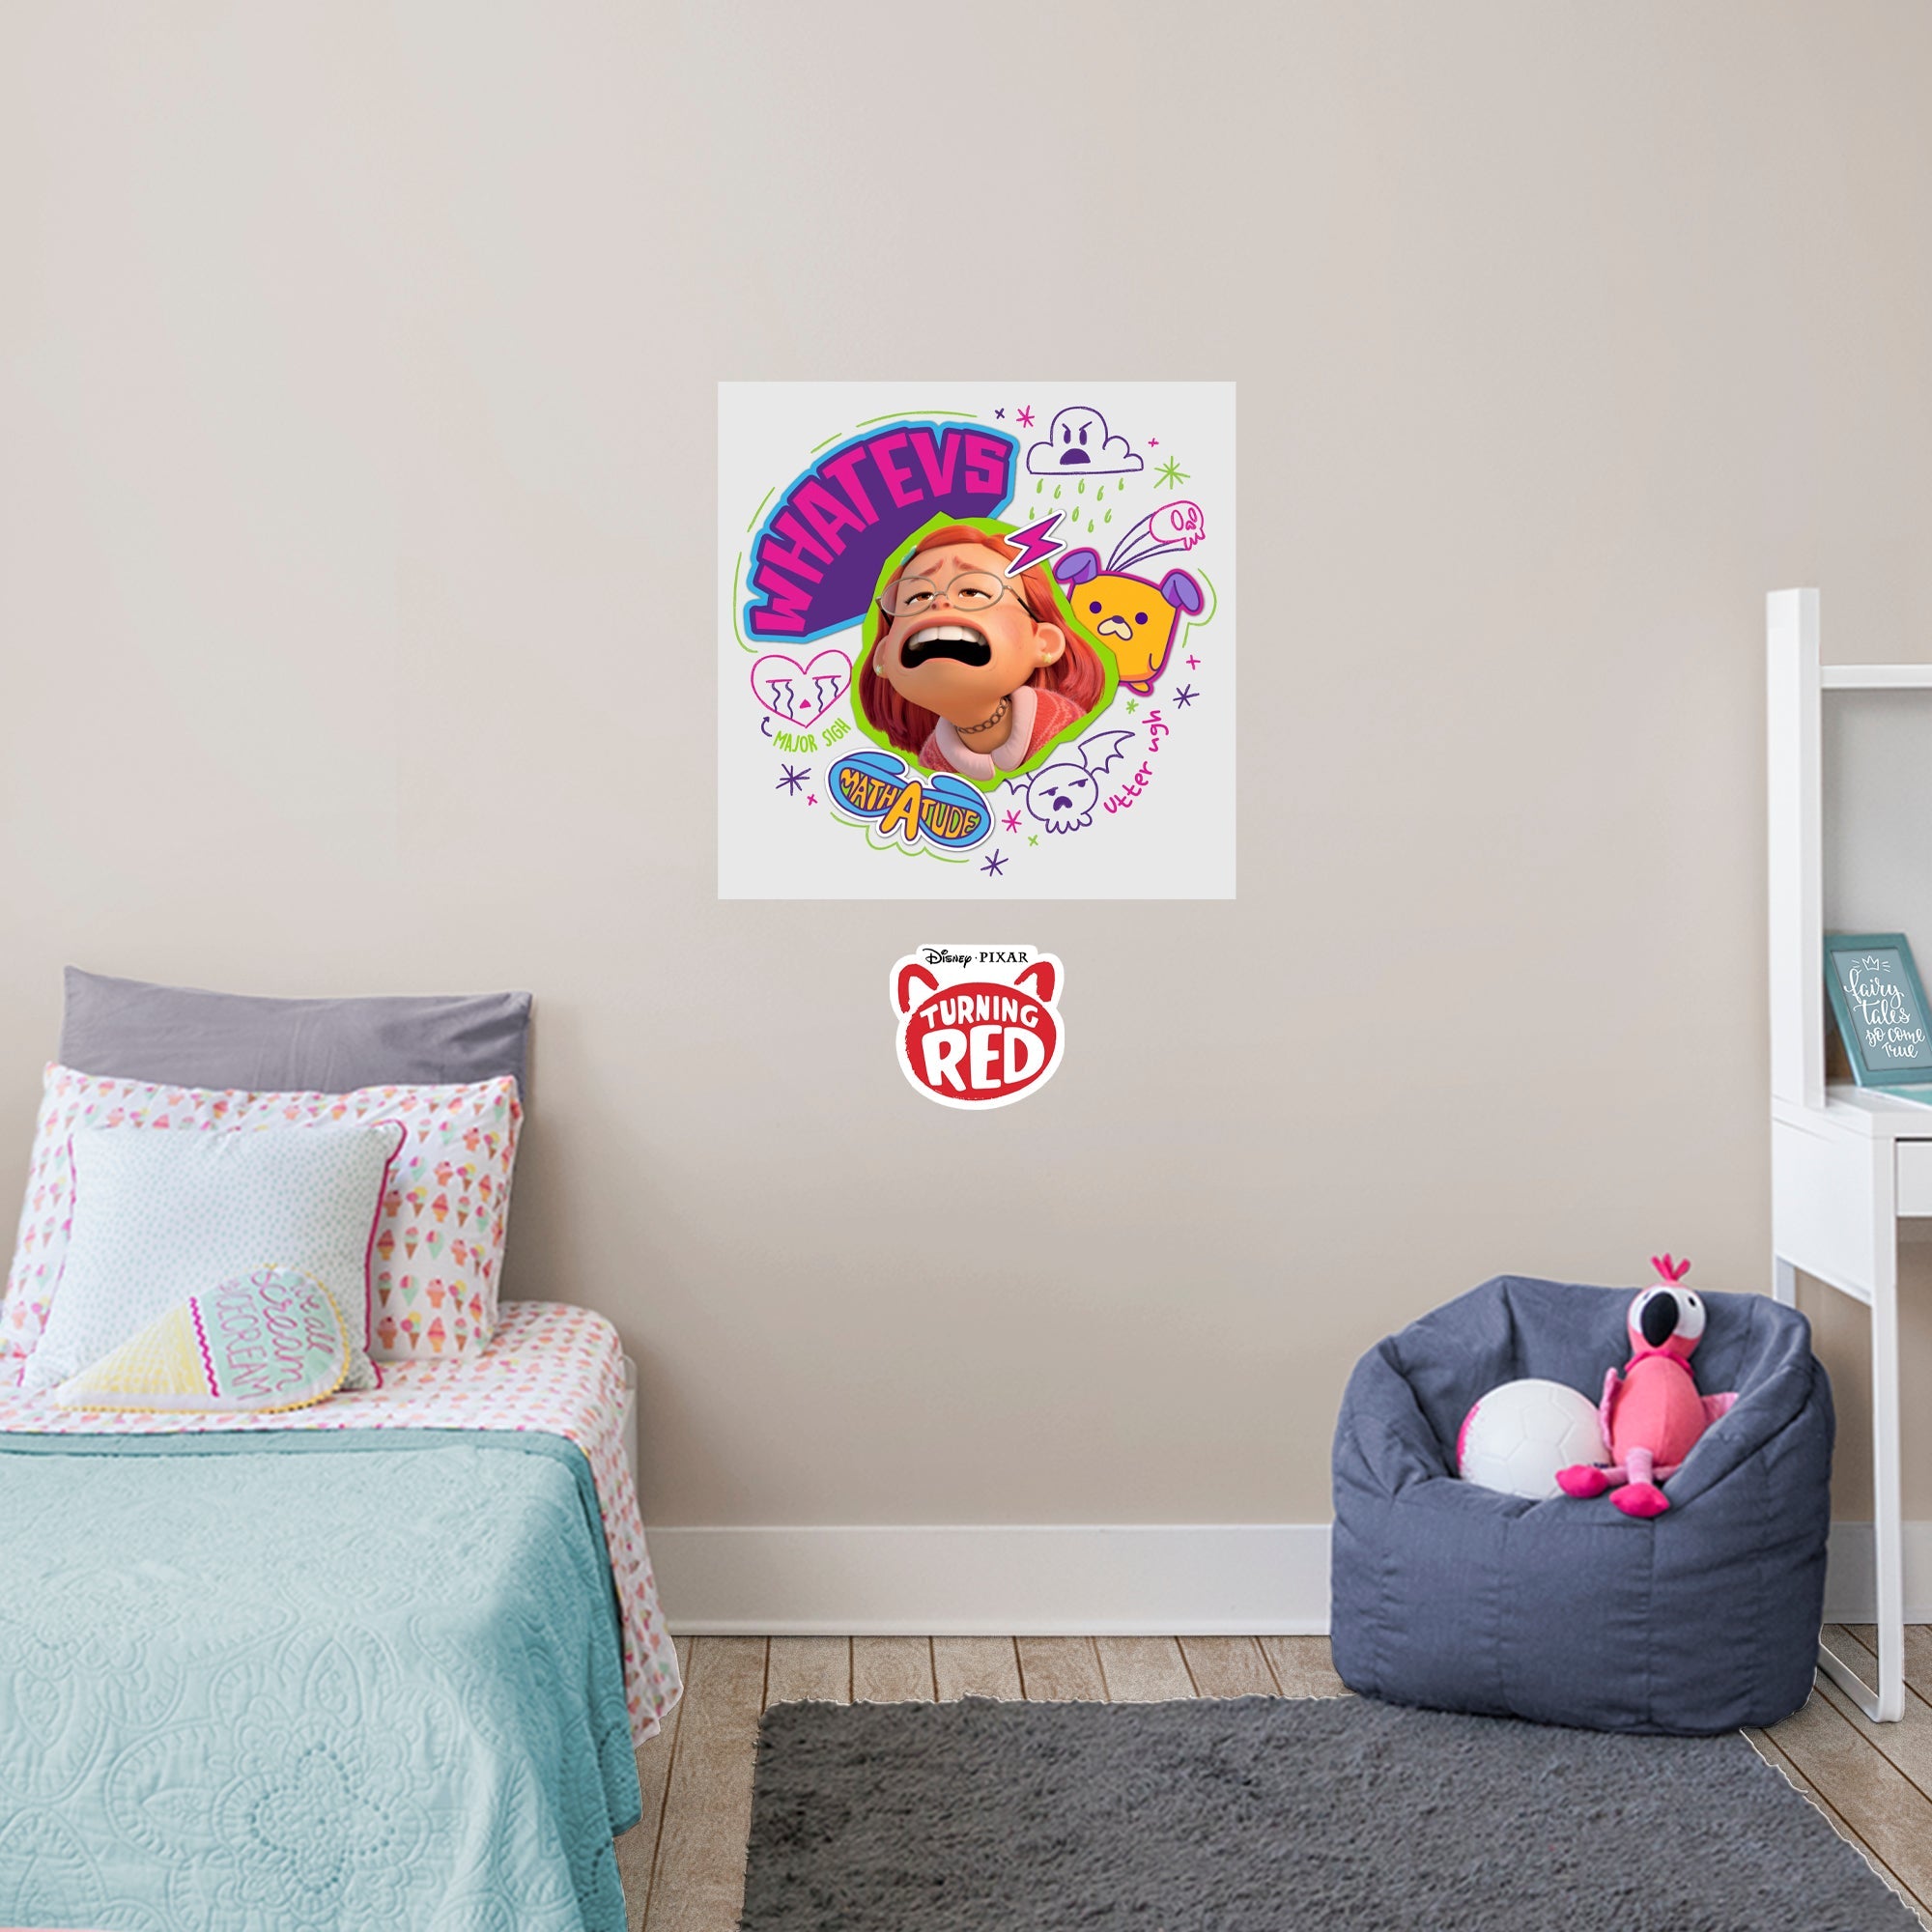 Turning Red: Meilin Whatevs Poster - Officially Licensed Disney Remova –  Fathead